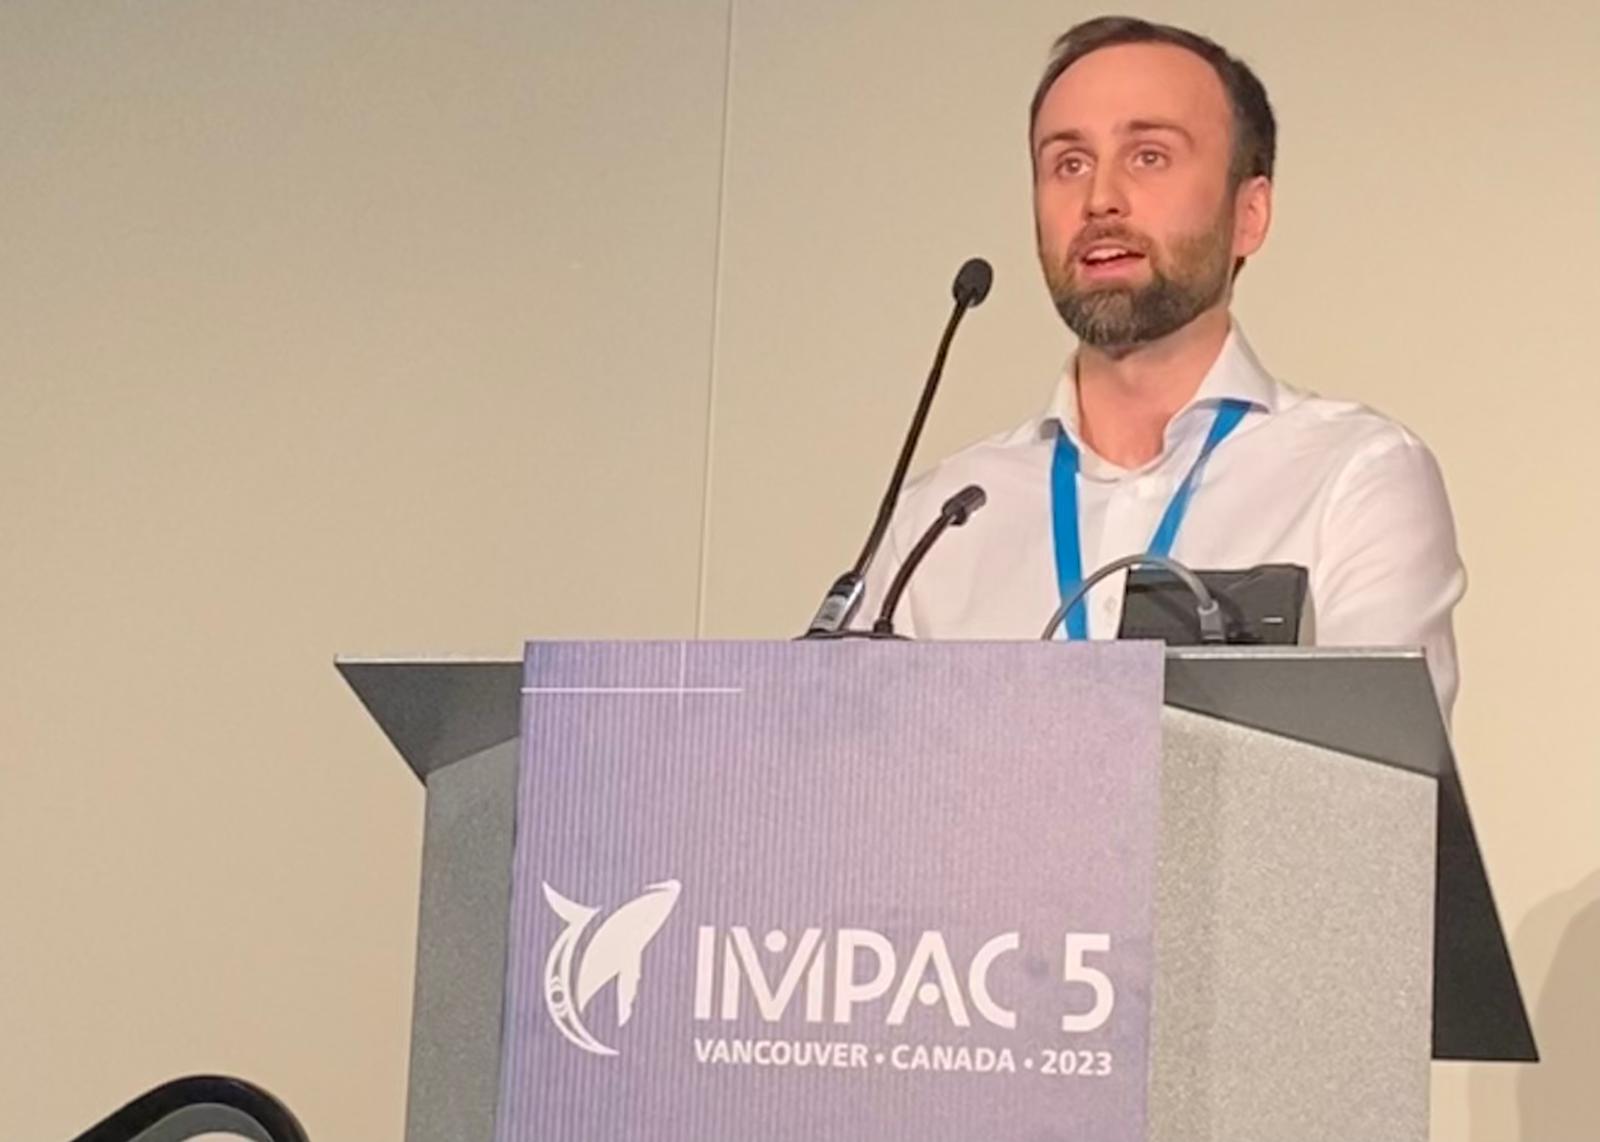 A man standing at a podium with an IMPAC5 sign on it